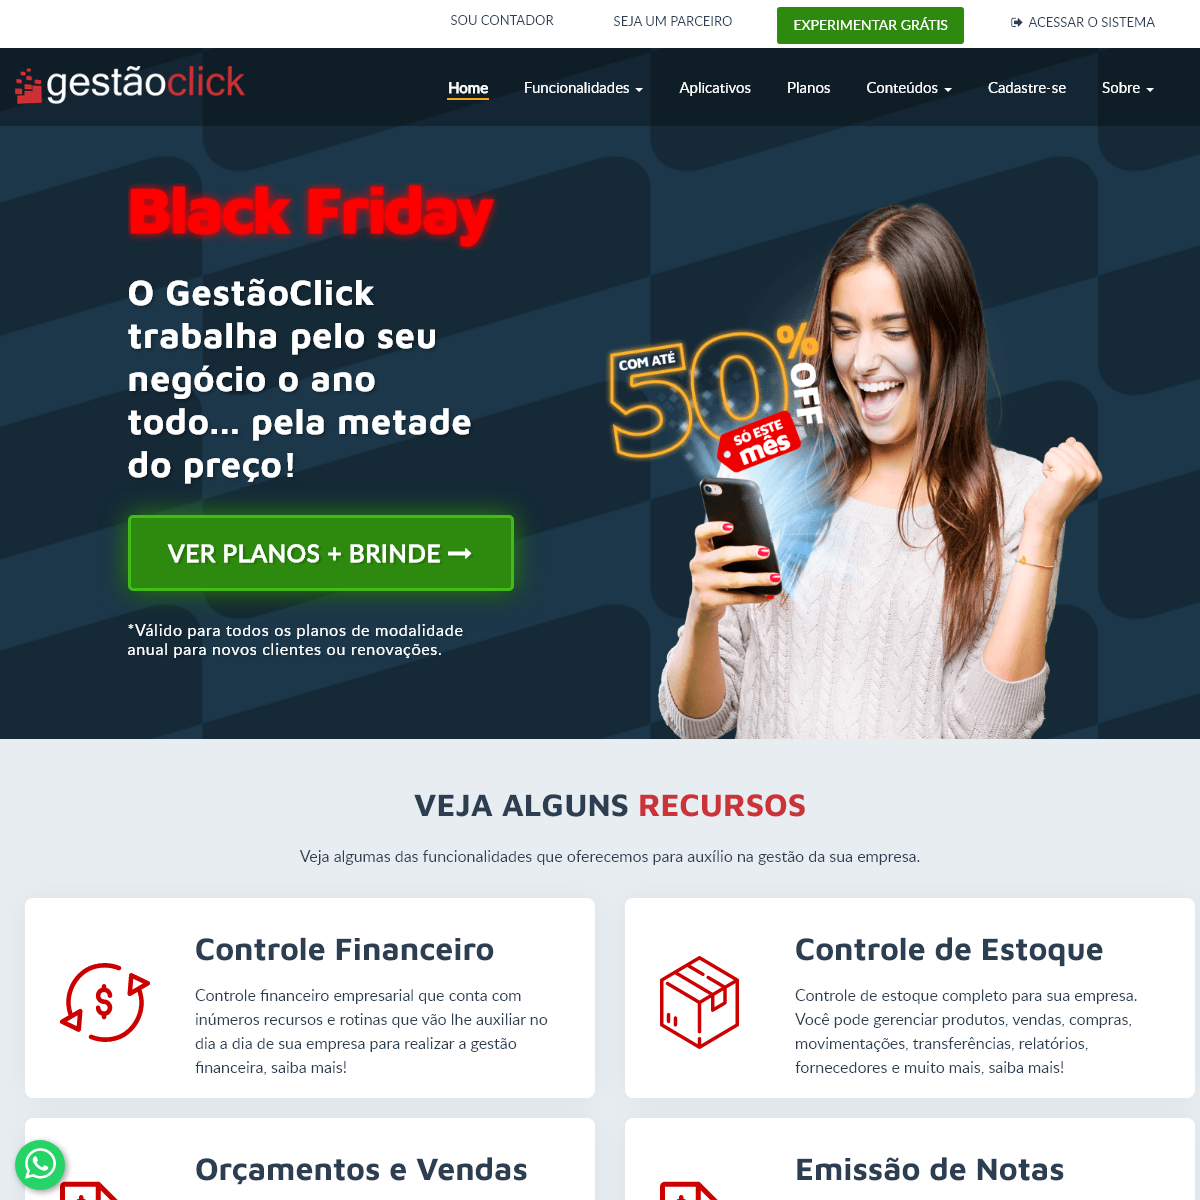 A complete backup of gestaoclick.com.br